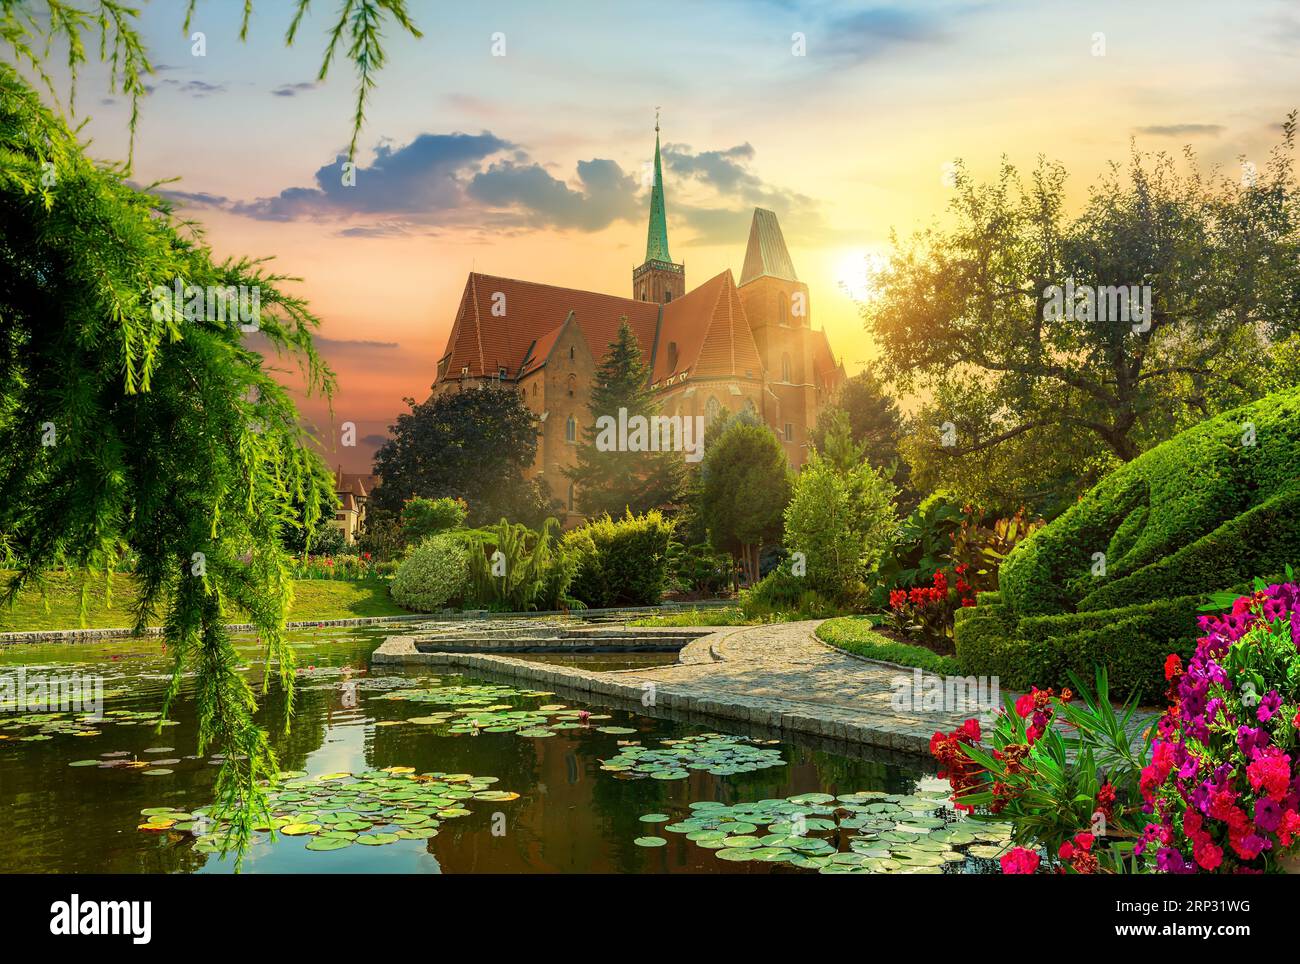 Botanical garden of Wroclaw. View of the cathedral and the lake with lotuses Stock Photo